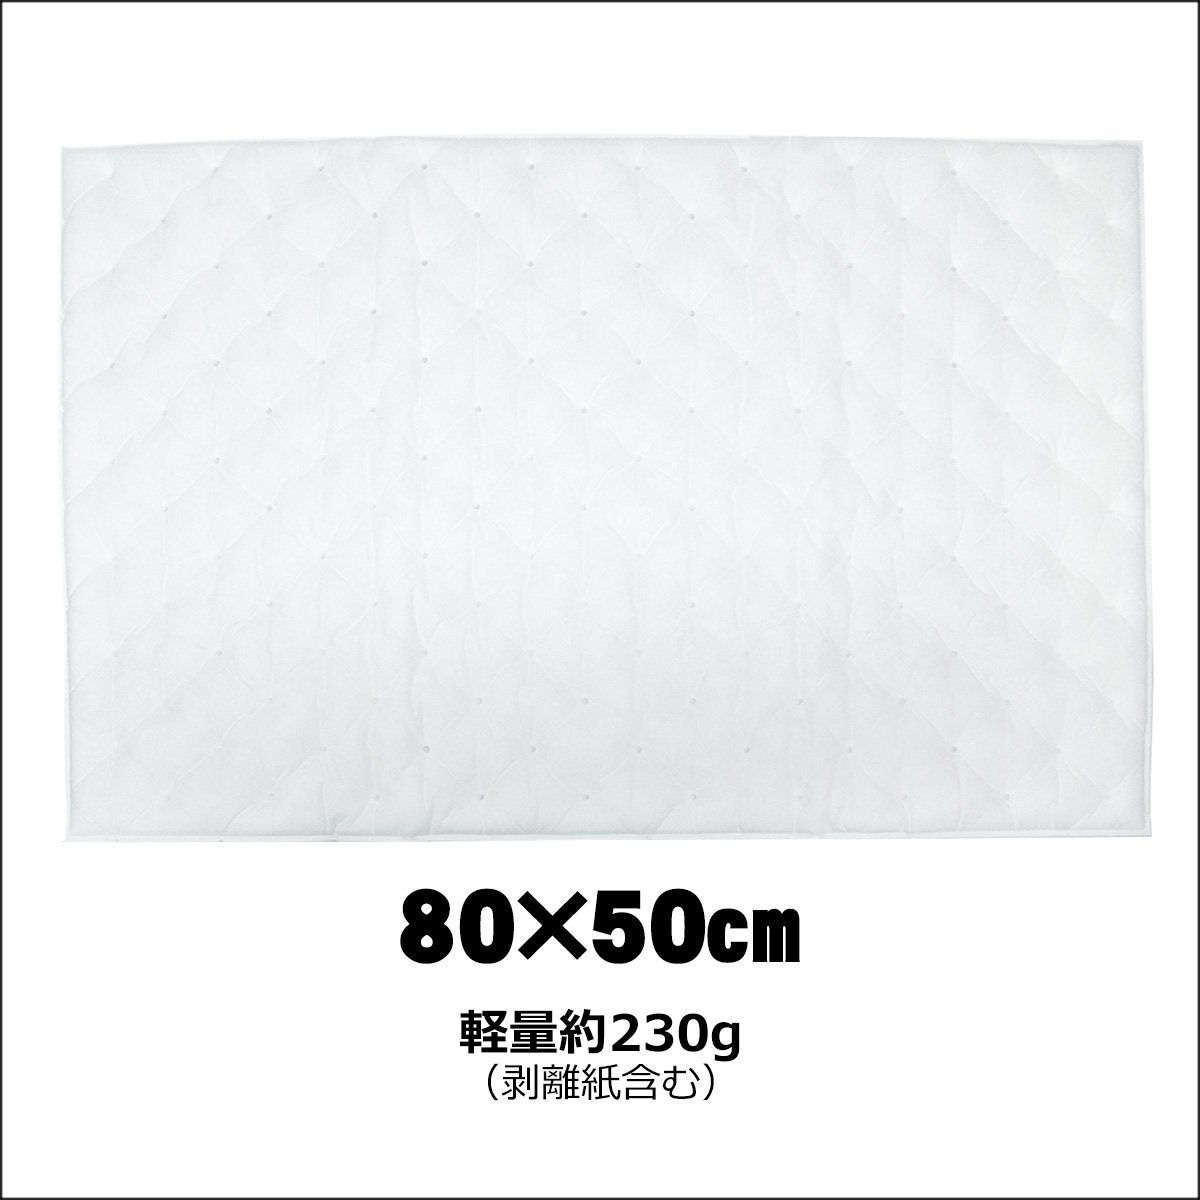  free shipping deadning seat (W) light weight sound-absorbing seat 50×80cm white soundproofing heat insulating material noise reduction sound quality improvement /9д